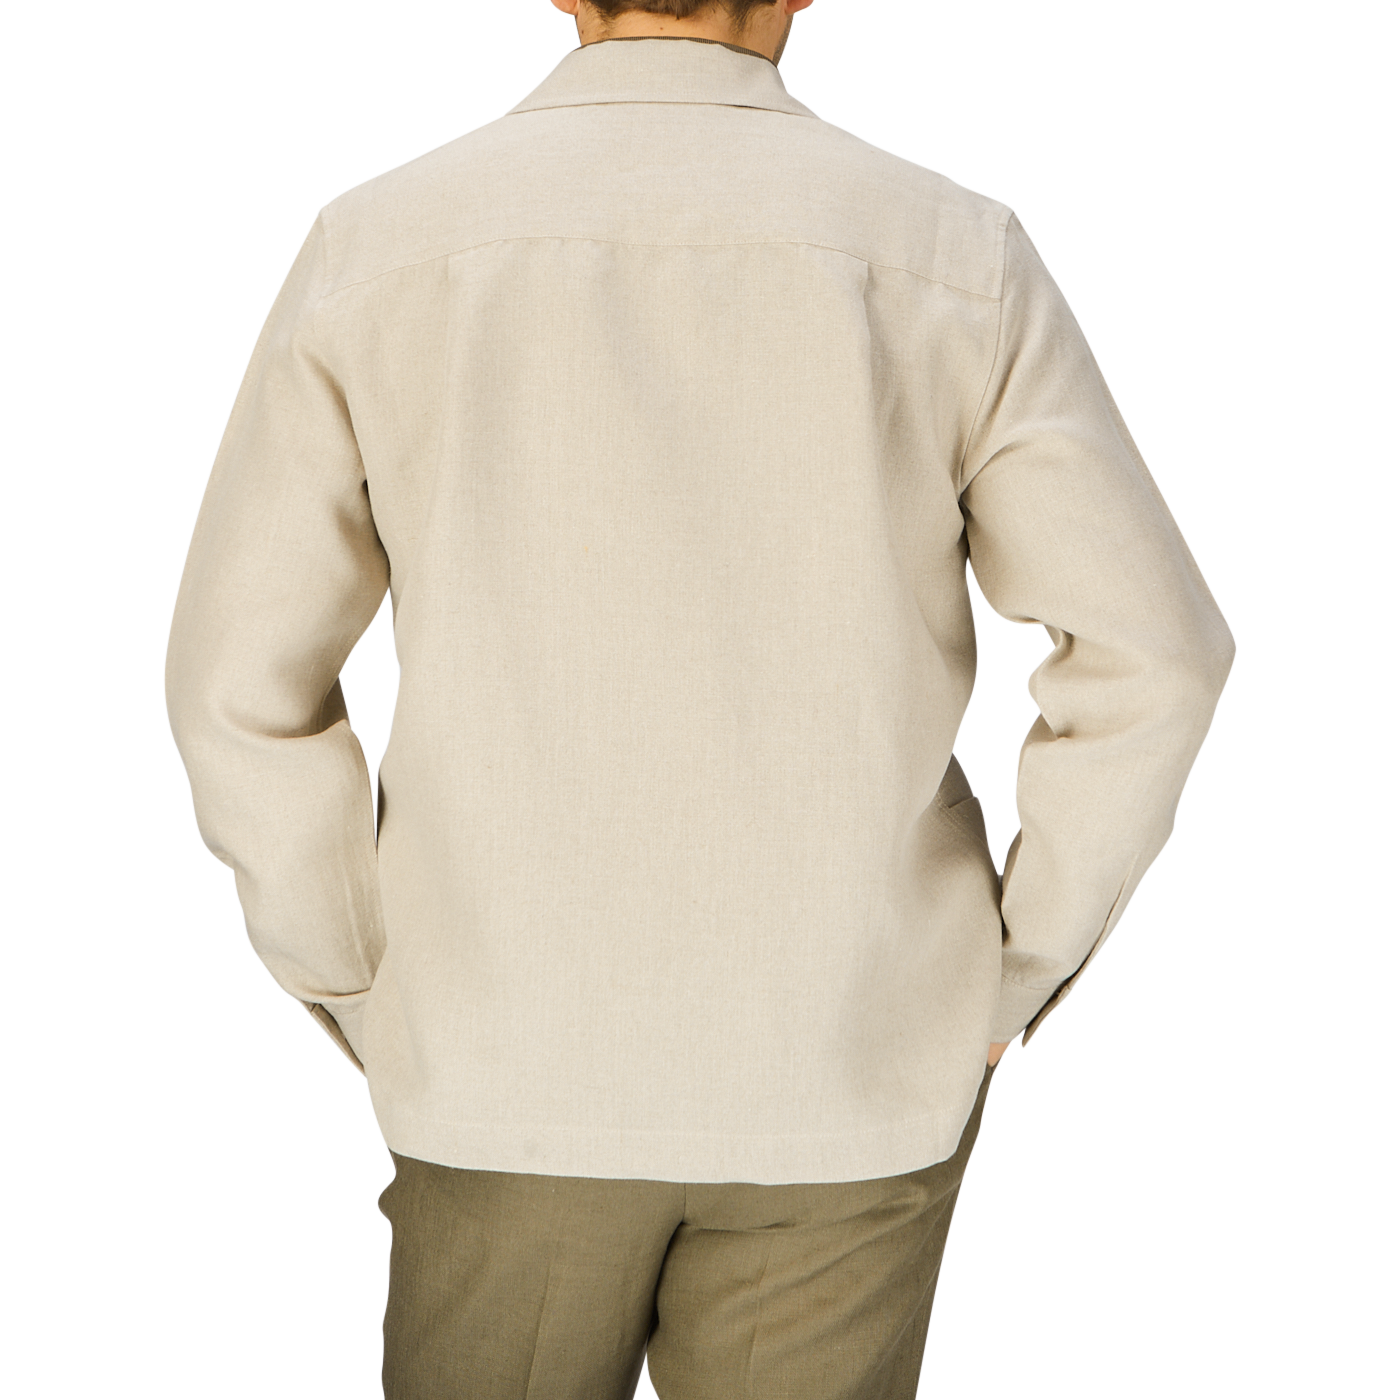 A man viewed from behind, wearing an unbuttoned Oatmeal Beige Linen Canvas Painter's Jacket by De Bonne Facture and dark green trousers, standing against a light gray background.